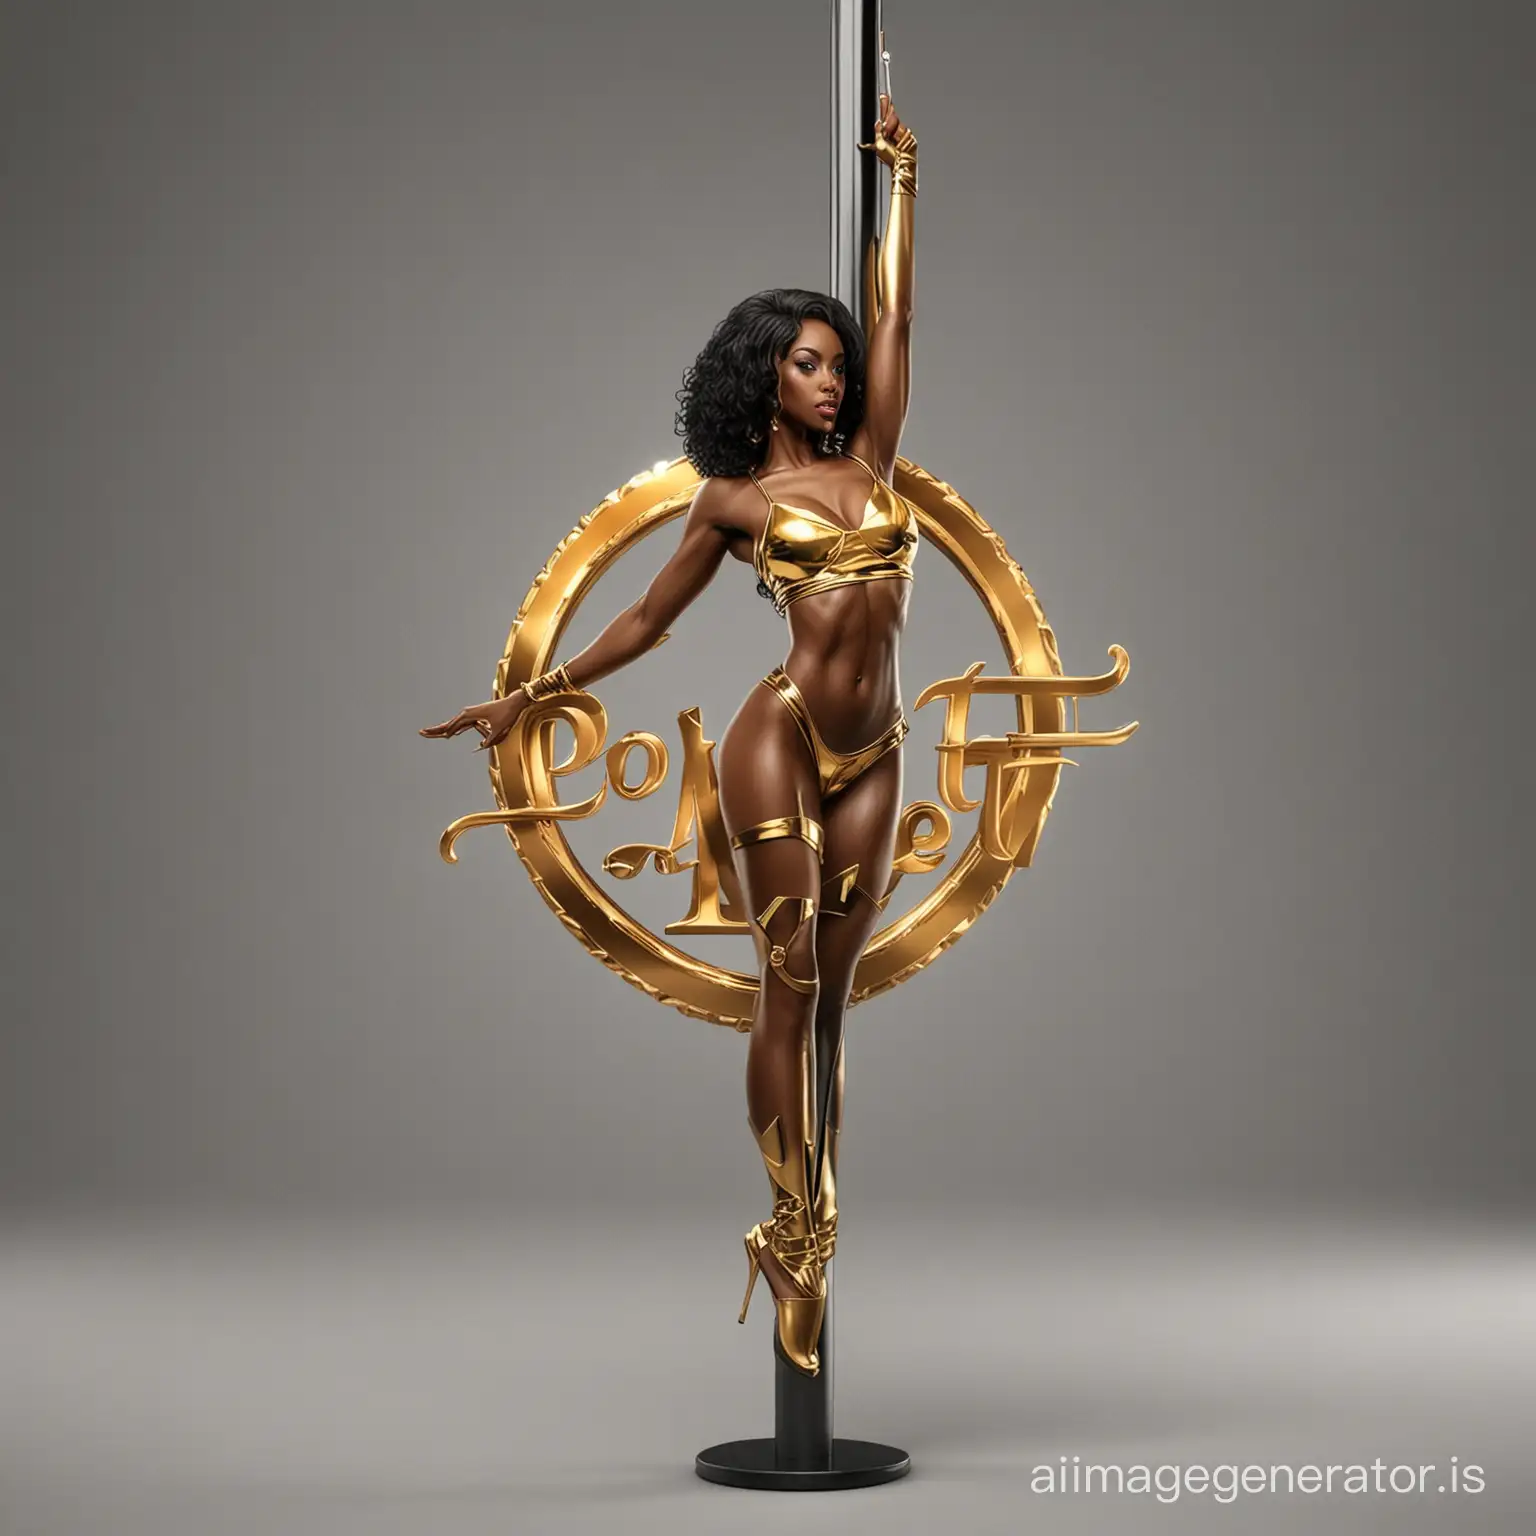 Elegant-Metallic-3D-Logo-Pole-Fit-101-Featuring-a-Sexy-Black-Woman-in-Gold-and-Black-Theme